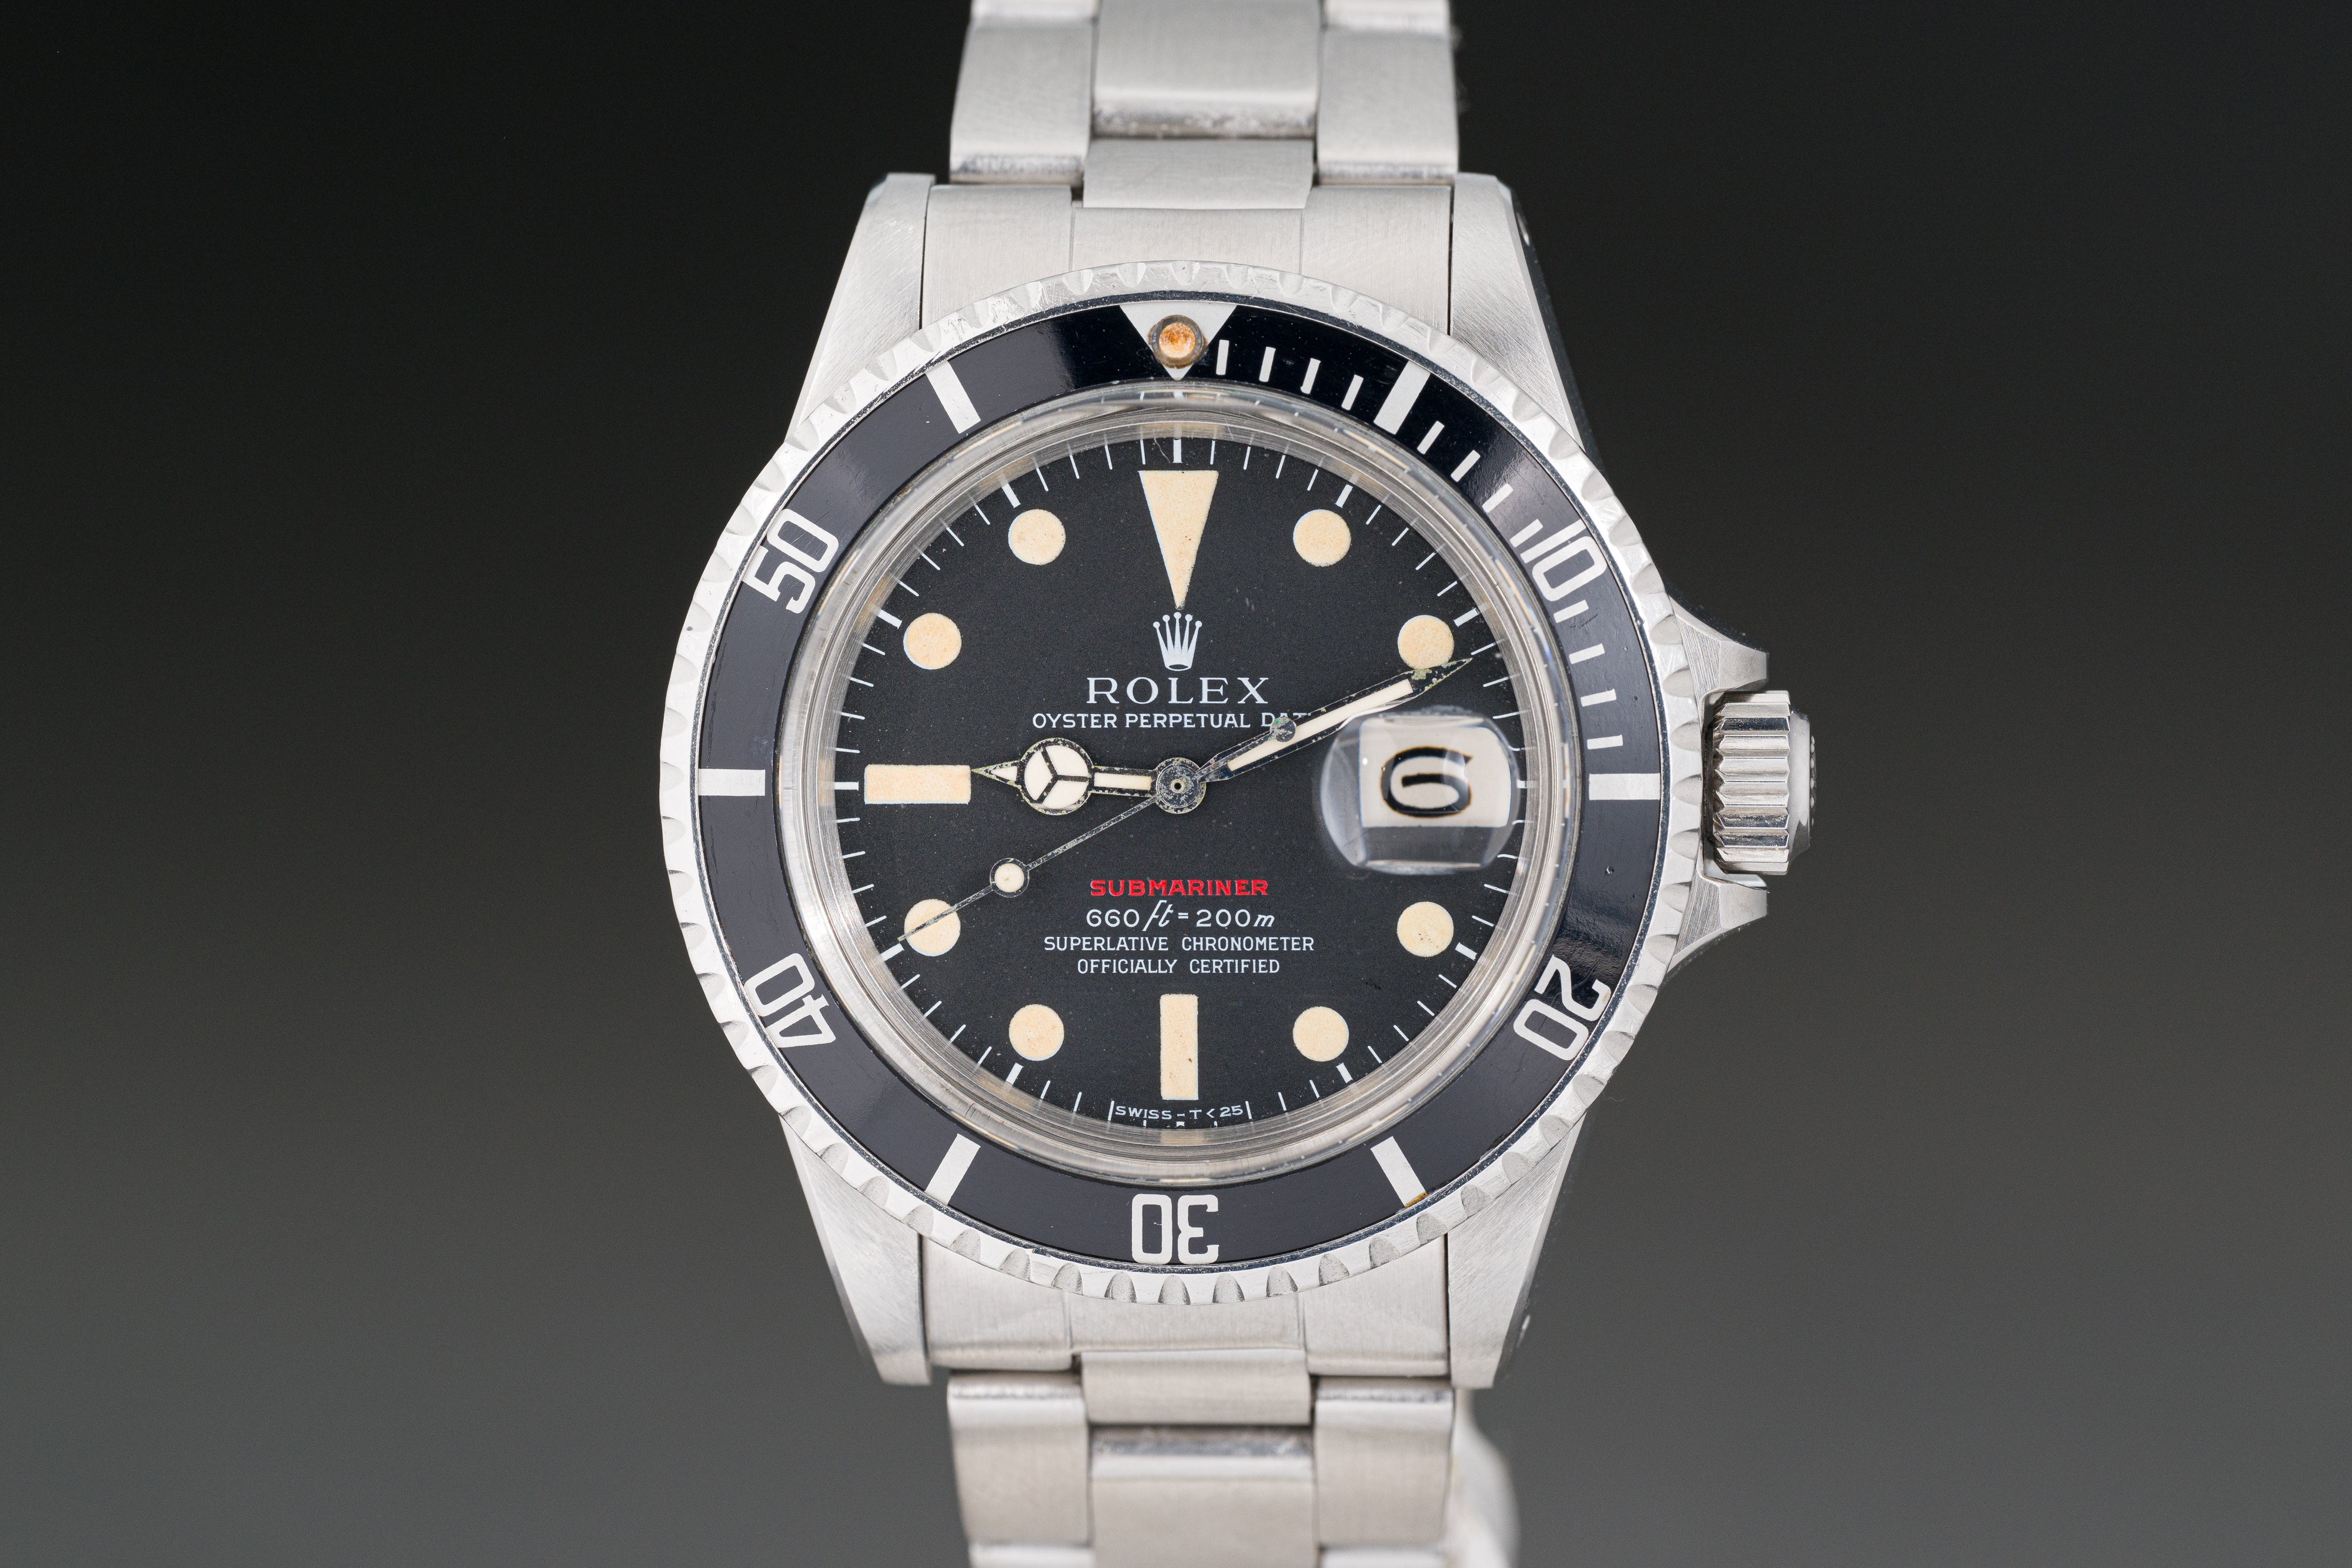 HQ Milton - Rolex Red Submariner 1680 MK Dial Creamy Lume Plots & Hands, Inventory #A5180, For Sale